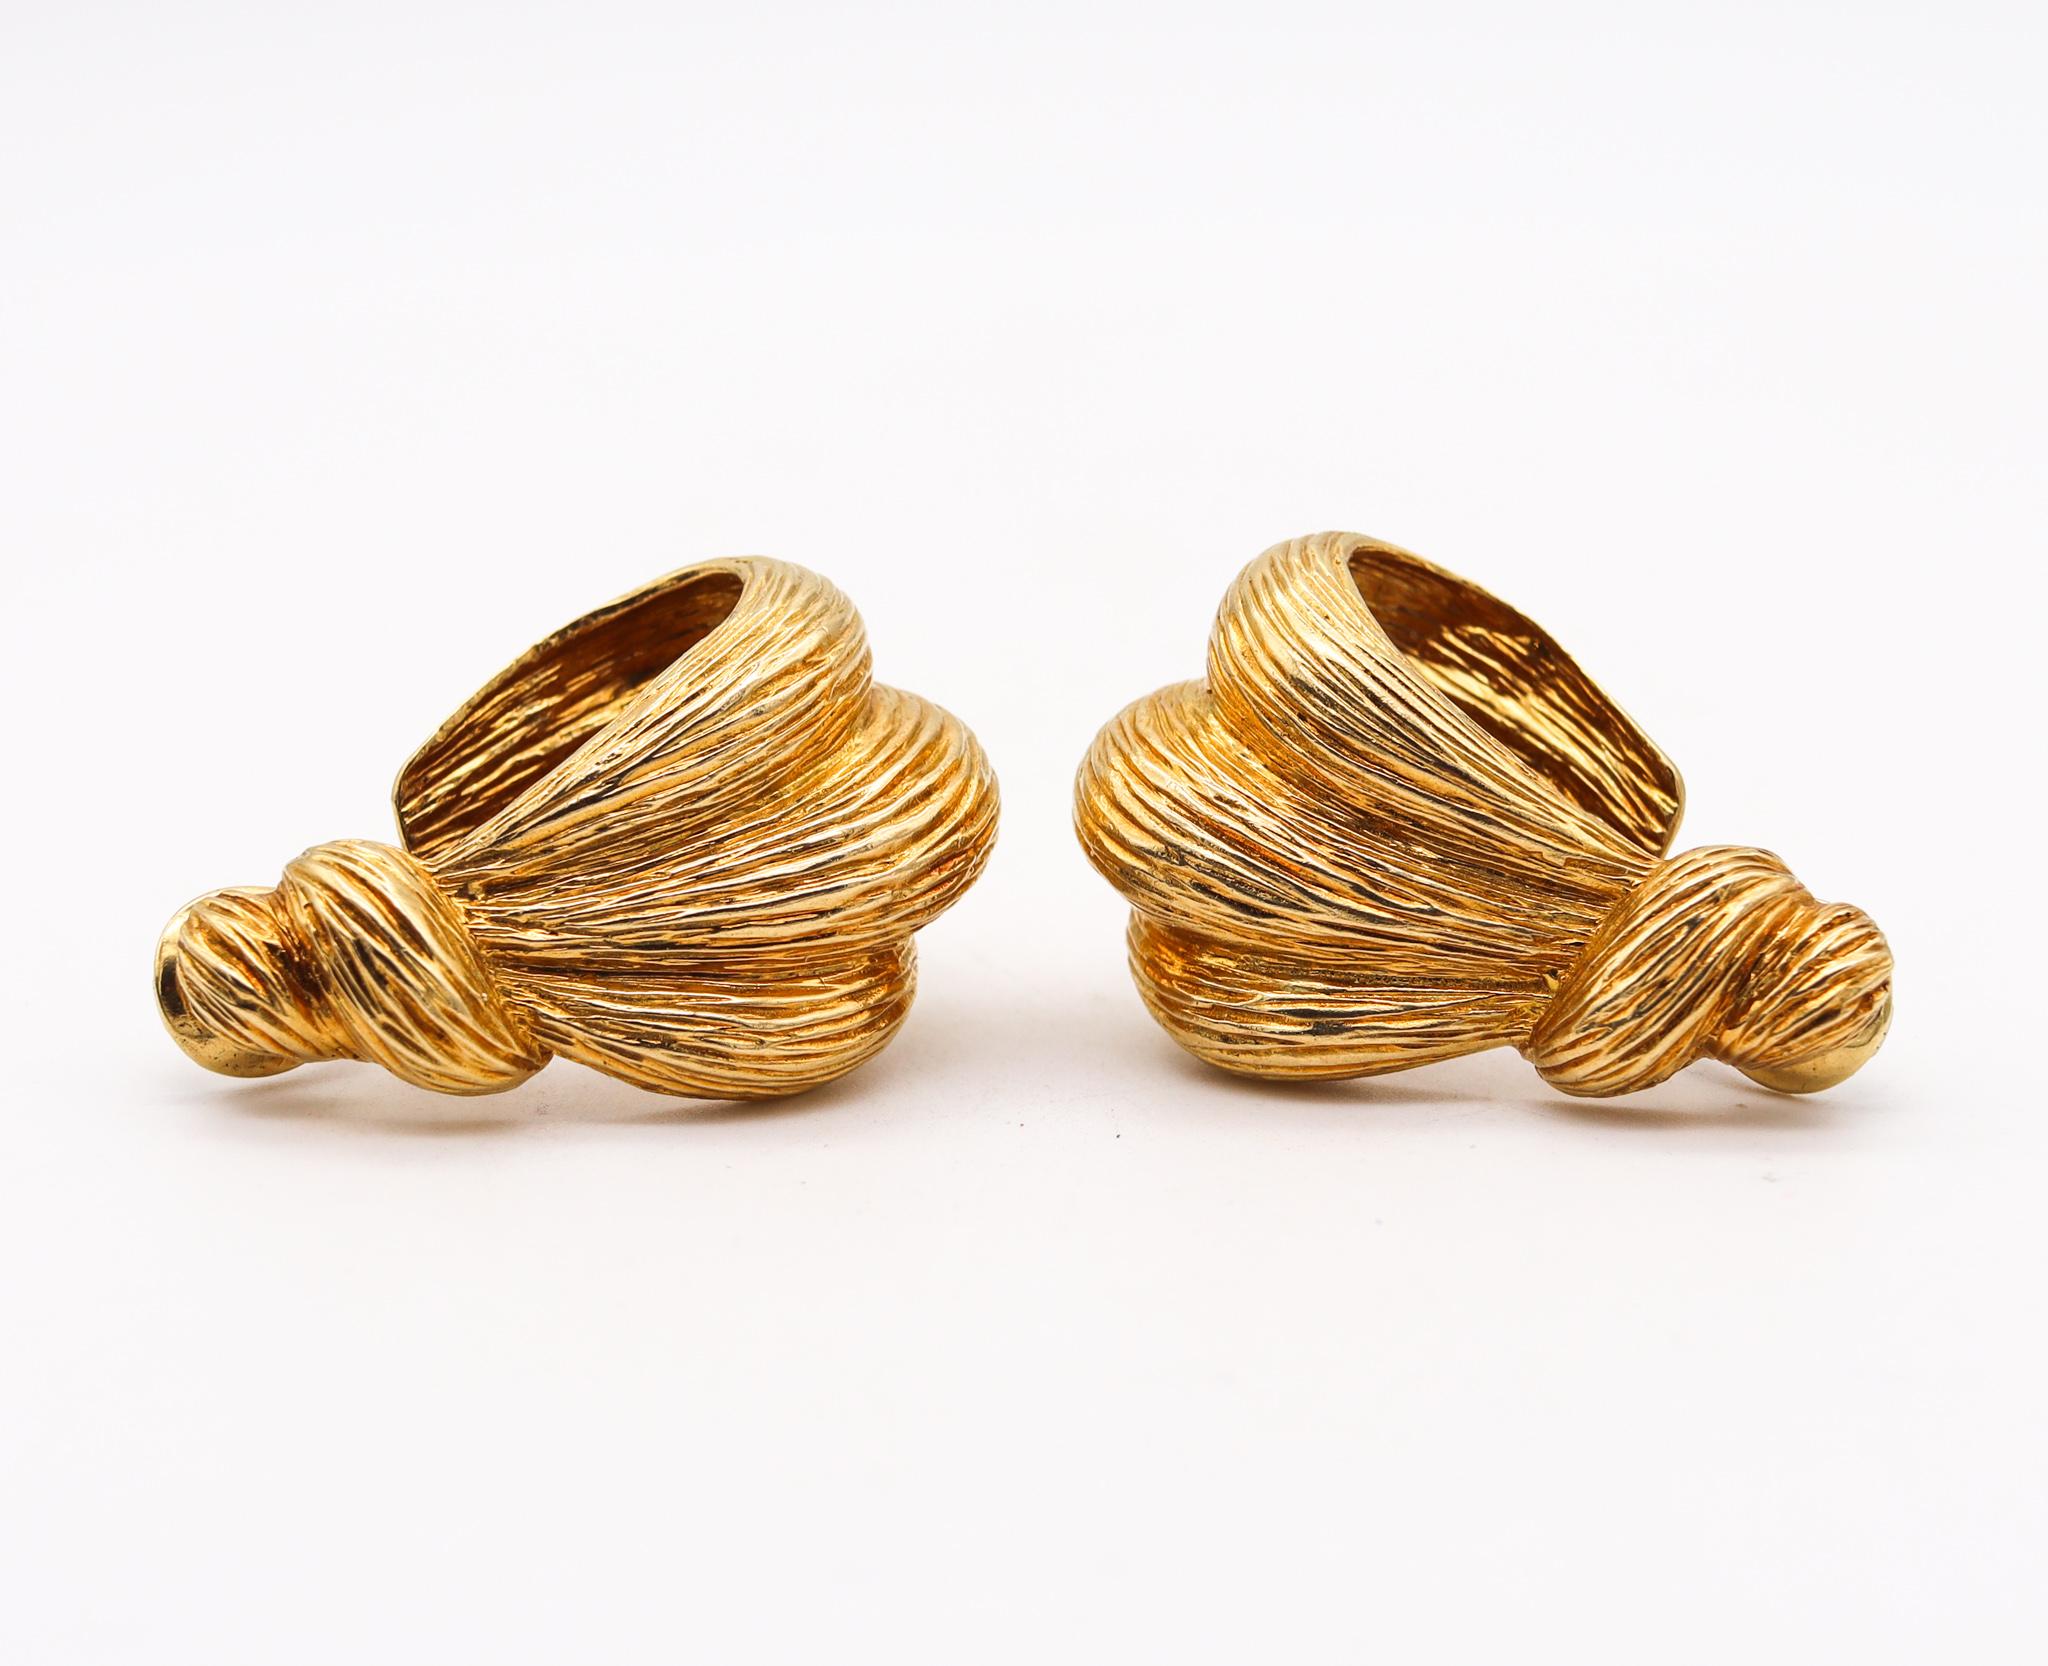 Wander France 1960 Modernist Wrapped Knots Clips Earrings Solid 18Kt Yellow Gold In Excellent Condition For Sale In Miami, FL